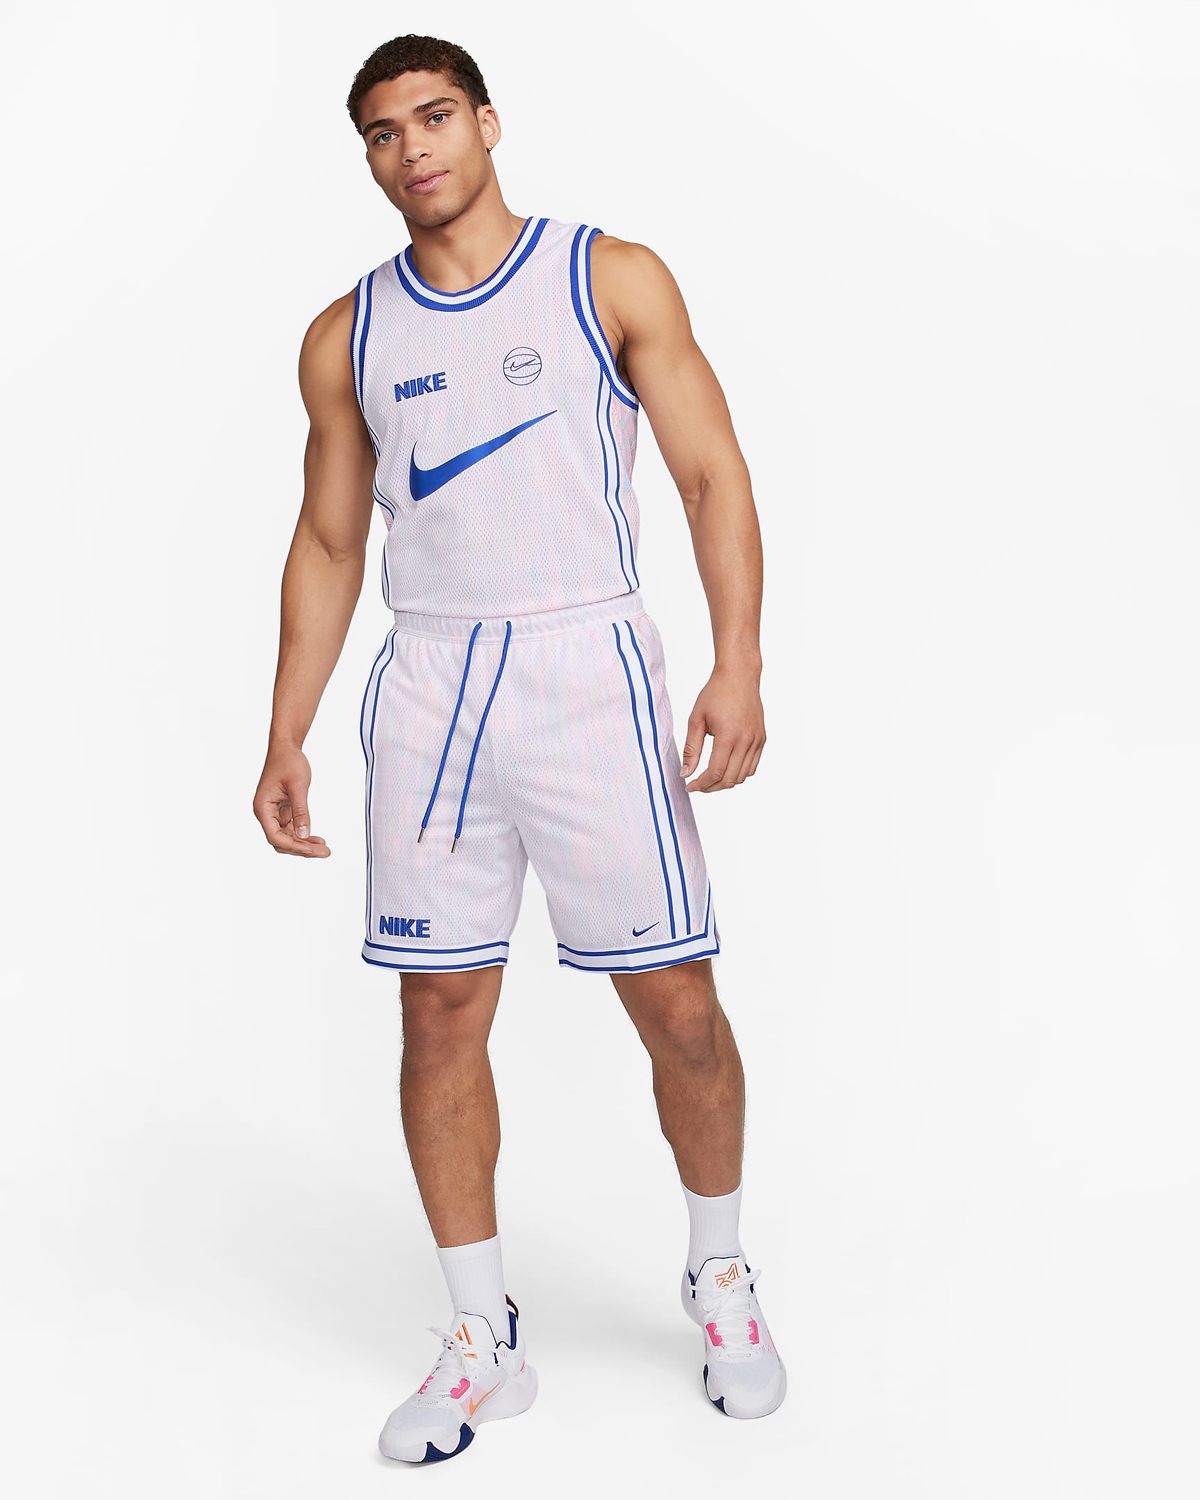 Nike-Dri-Fit-DNA-Basketball-Jersey-and-Shorts-White-Game-Royal